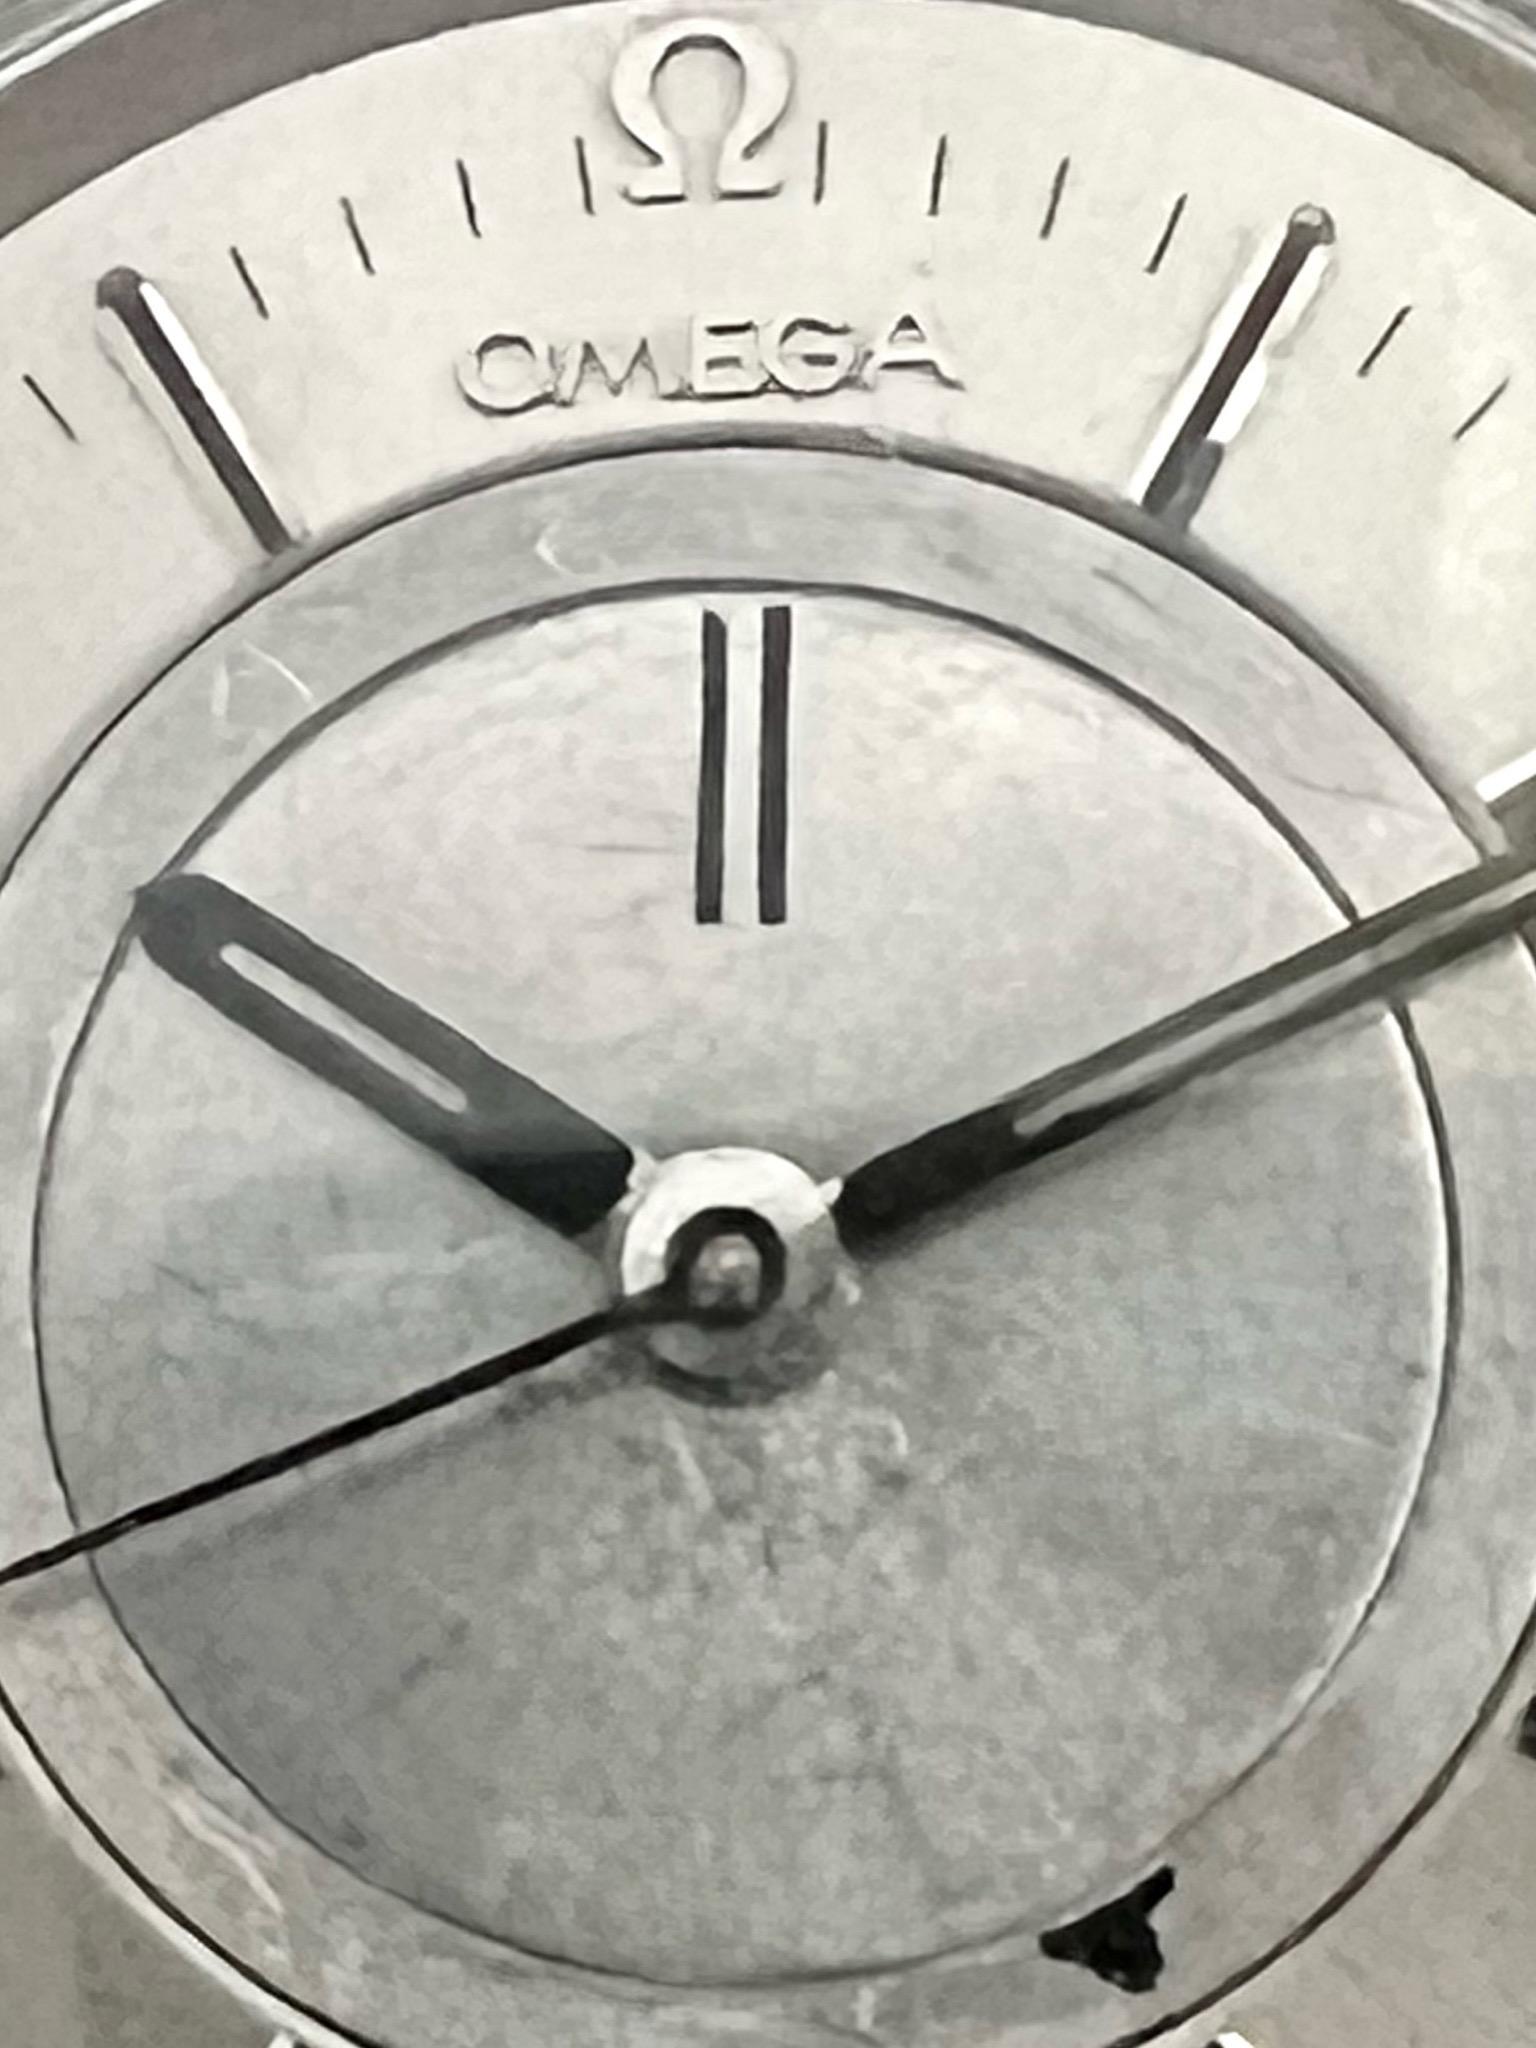 Vintage Omega Seamaster Memomatic, Model Ref. 166.072. Automatic winding calibre 980 movement. This is an excellent example of a fast appreciating watch model.

Stainless steel tonneau case with brushed sunburst finish, screw down case back signed